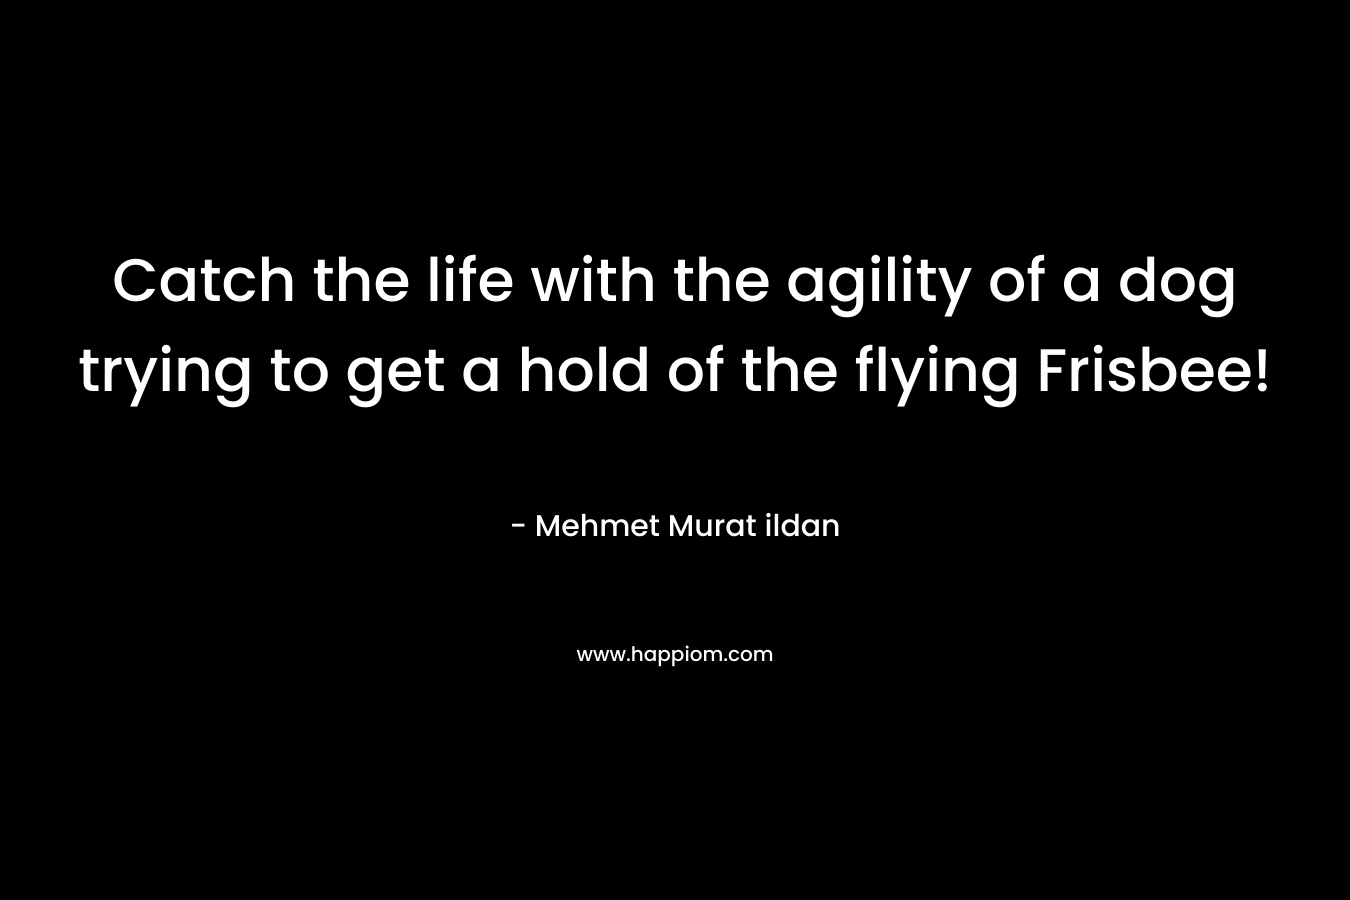 Catch the life with the agility of a dog trying to get a hold of the flying Frisbee! – Mehmet Murat ildan